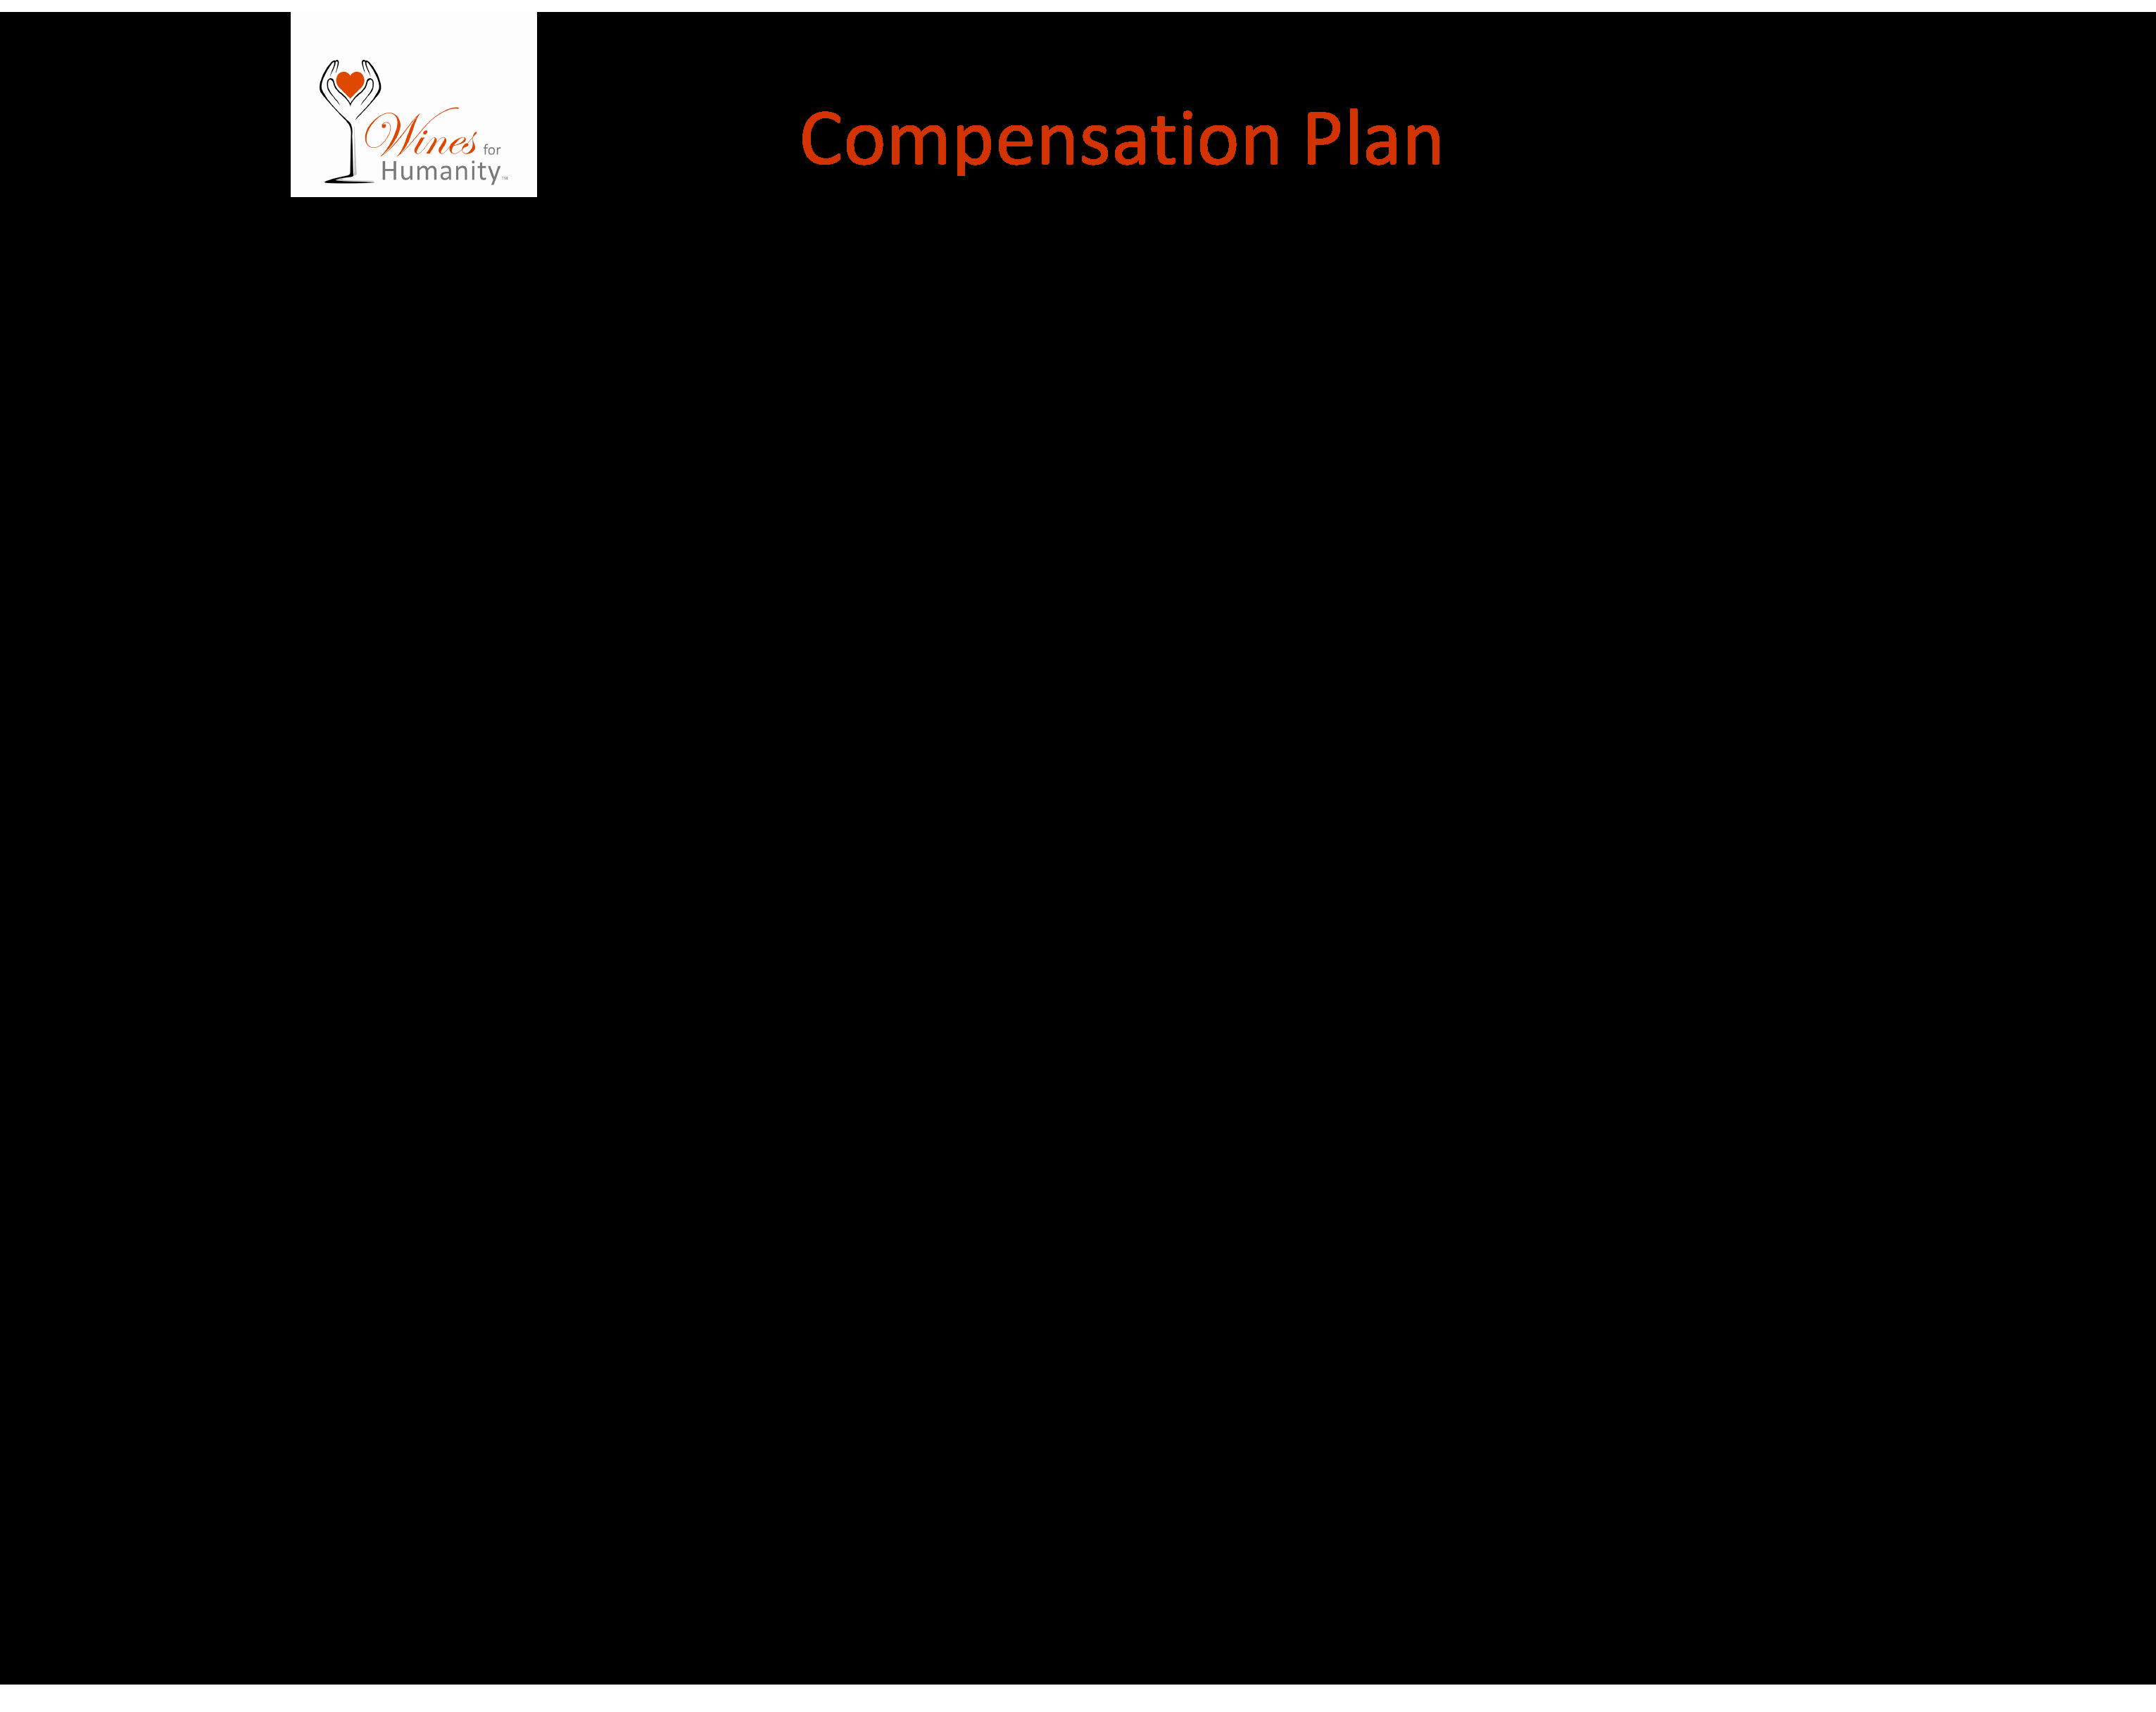 Professional Compensation Plan Template Luxury Mbo Sample Templates Image Collections Professional